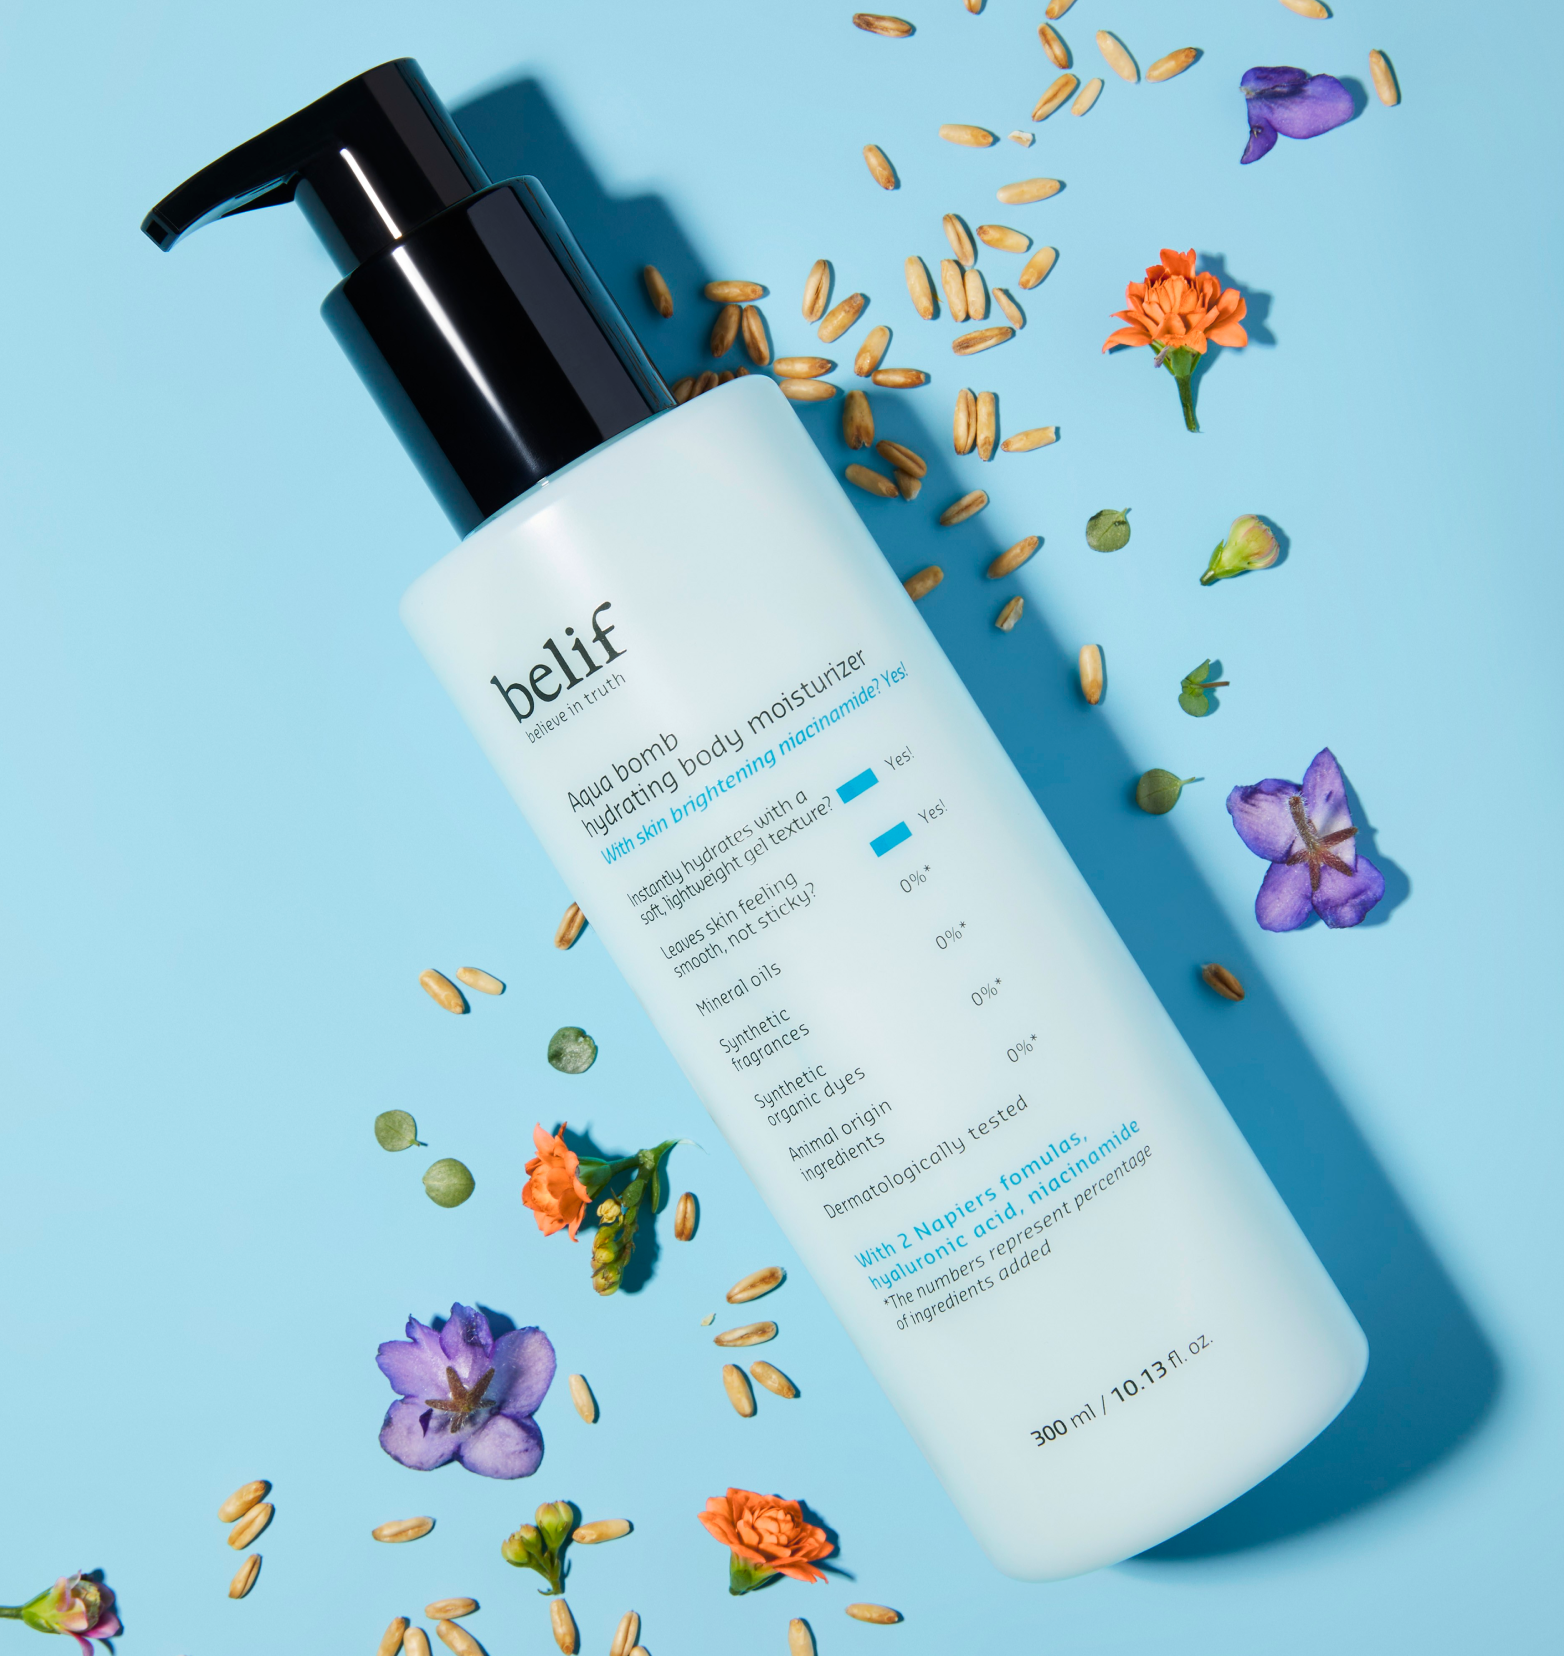 A white bottle of belif Aqua Bomb Hydrating Body Moisturizer lying on a light blue surface with a bunch of seeds and flowers scattered around